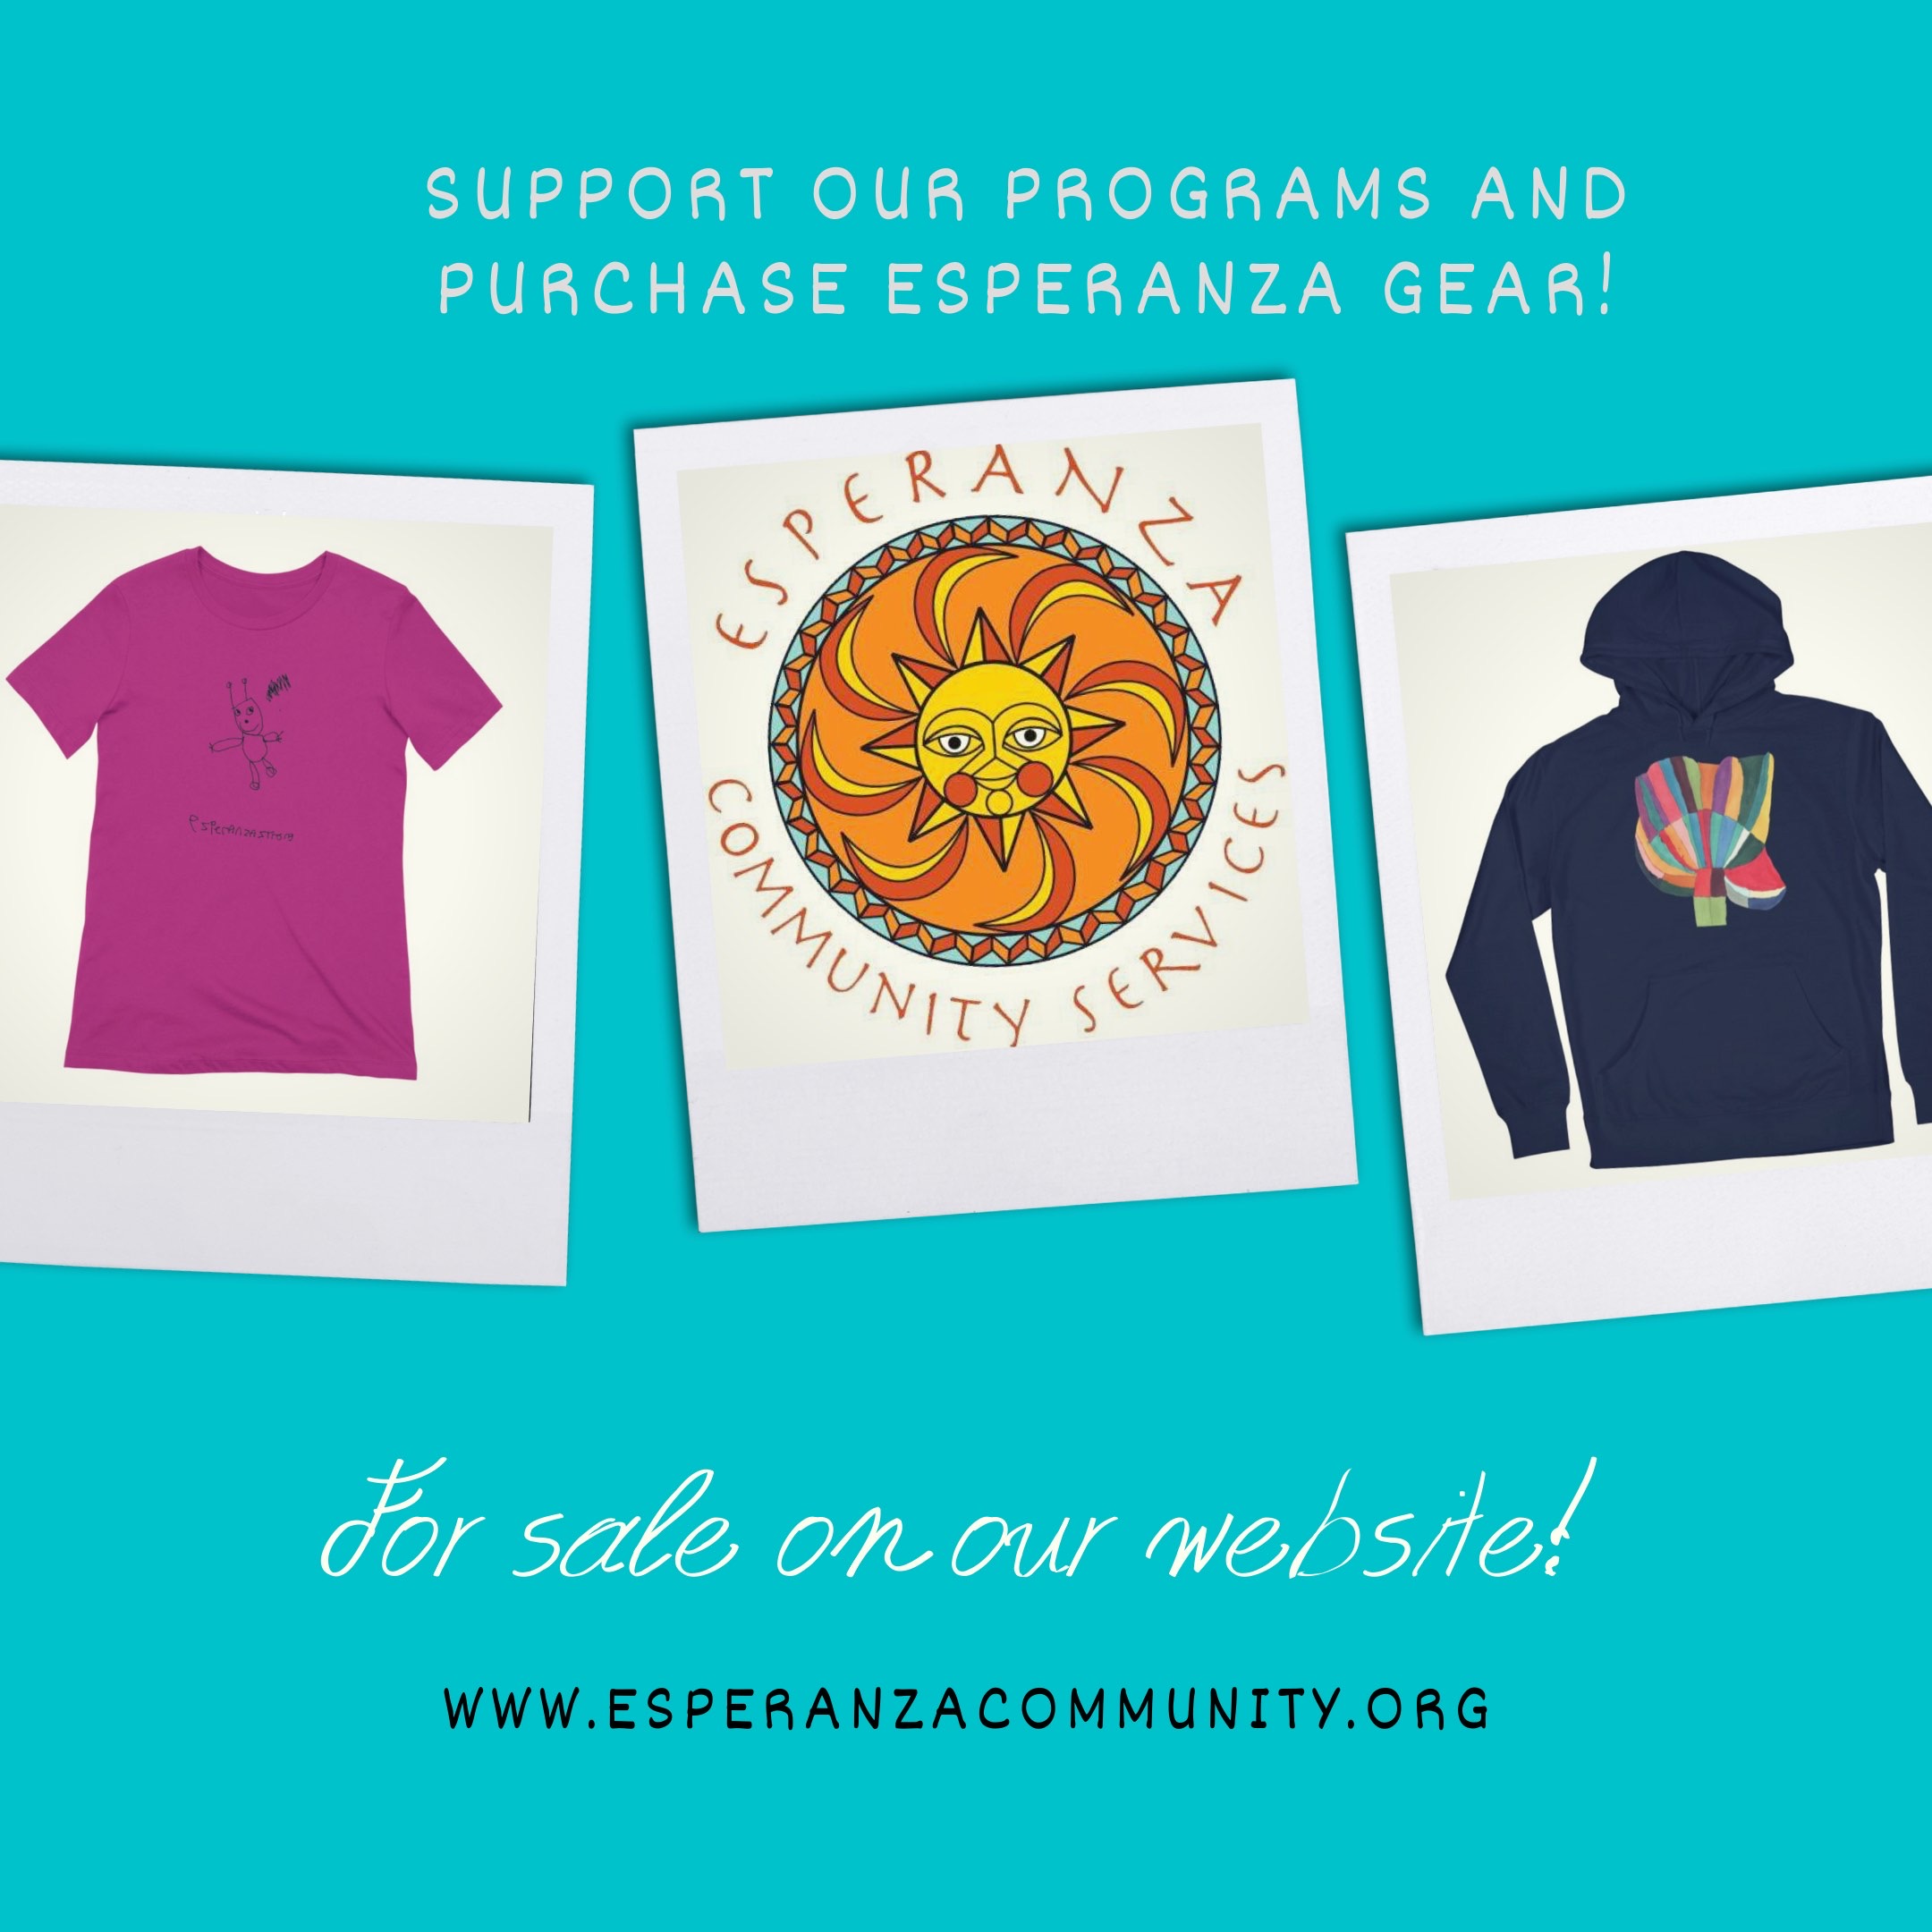 Buy Esperanza Merchandise and Support Our Programs!